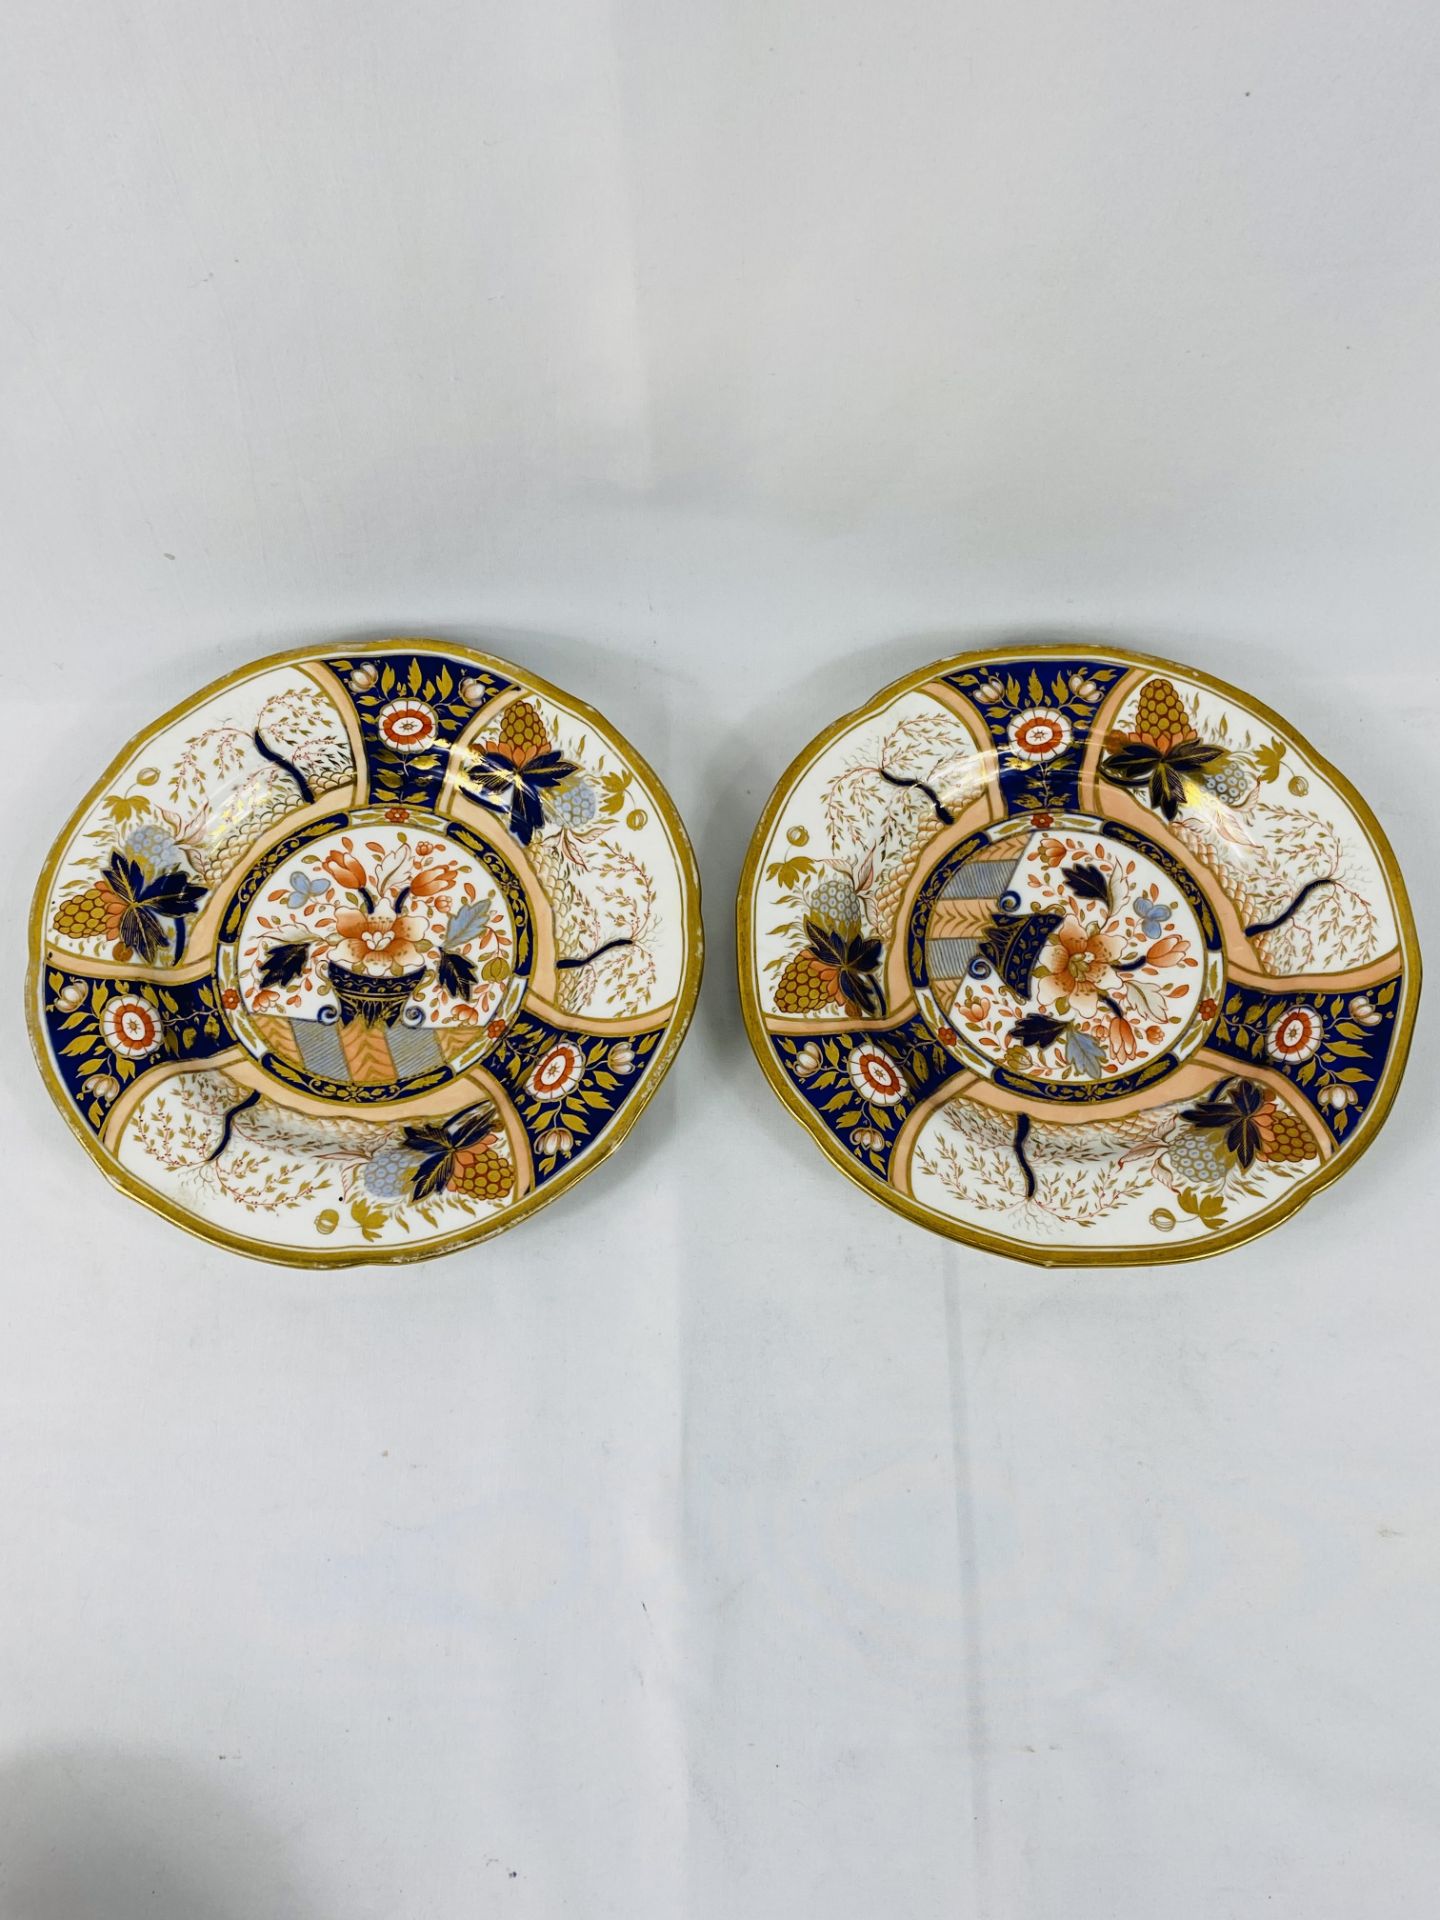 Crown Derby inkwell, two cabinet plates and bowls - Image 2 of 7